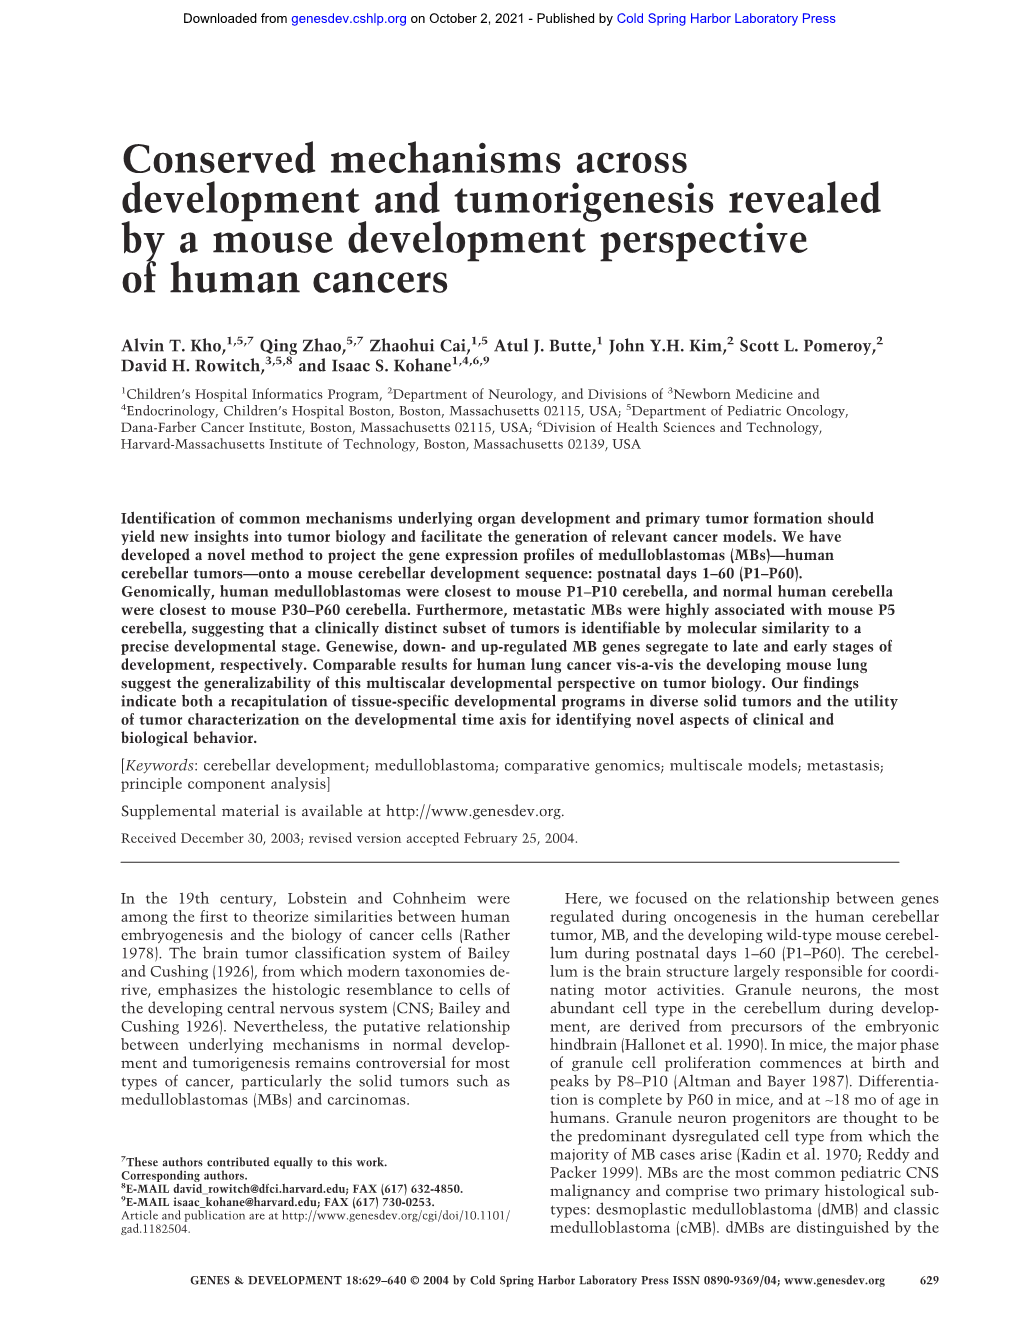 Conserved Mechanisms Across Development and Tumorigenesis Revealed by a Mouse Development Perspective of Human Cancers